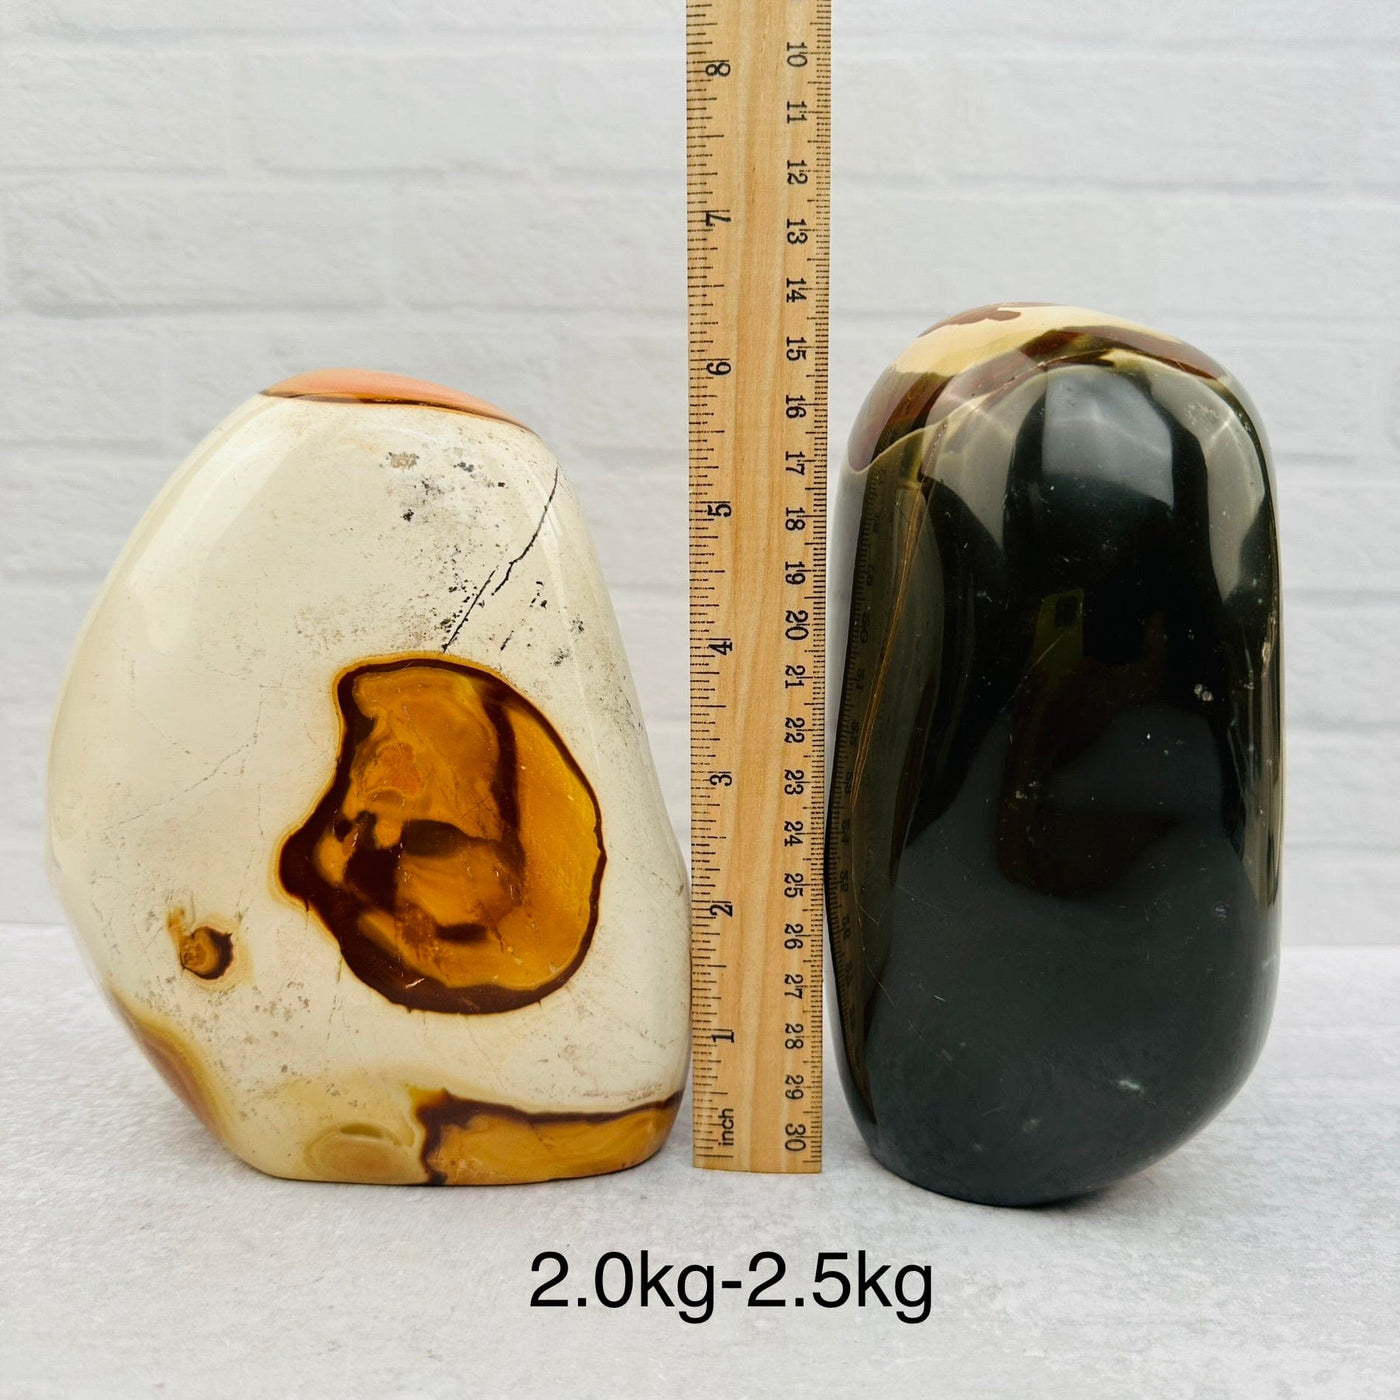 Polychrome Jasper Cut Base - YOU CHOOSE SIZE next to a ruler for size reference 